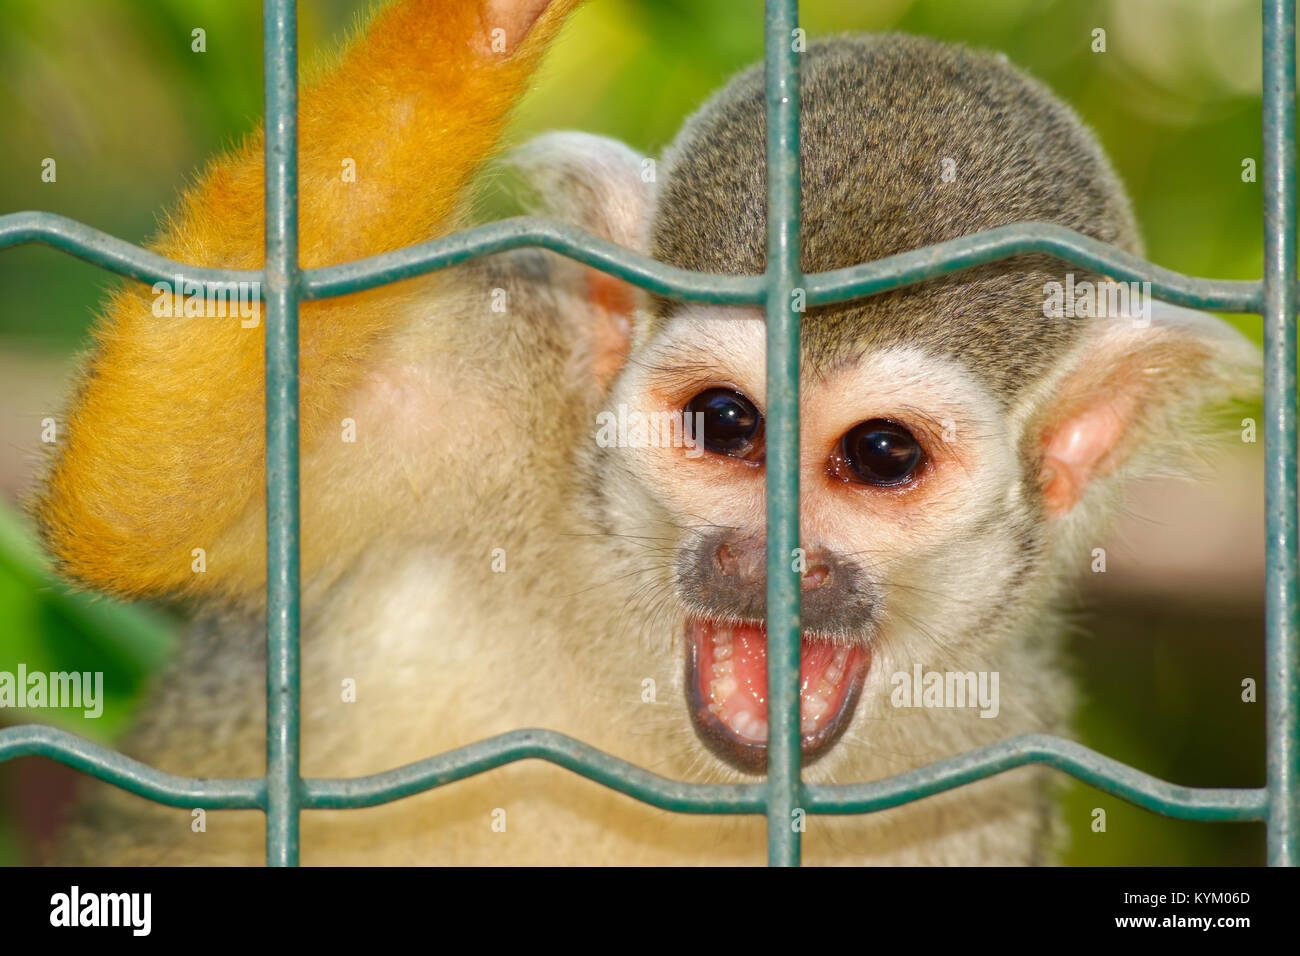 Squirrel Monkey furious and behind the bars Stock Photo